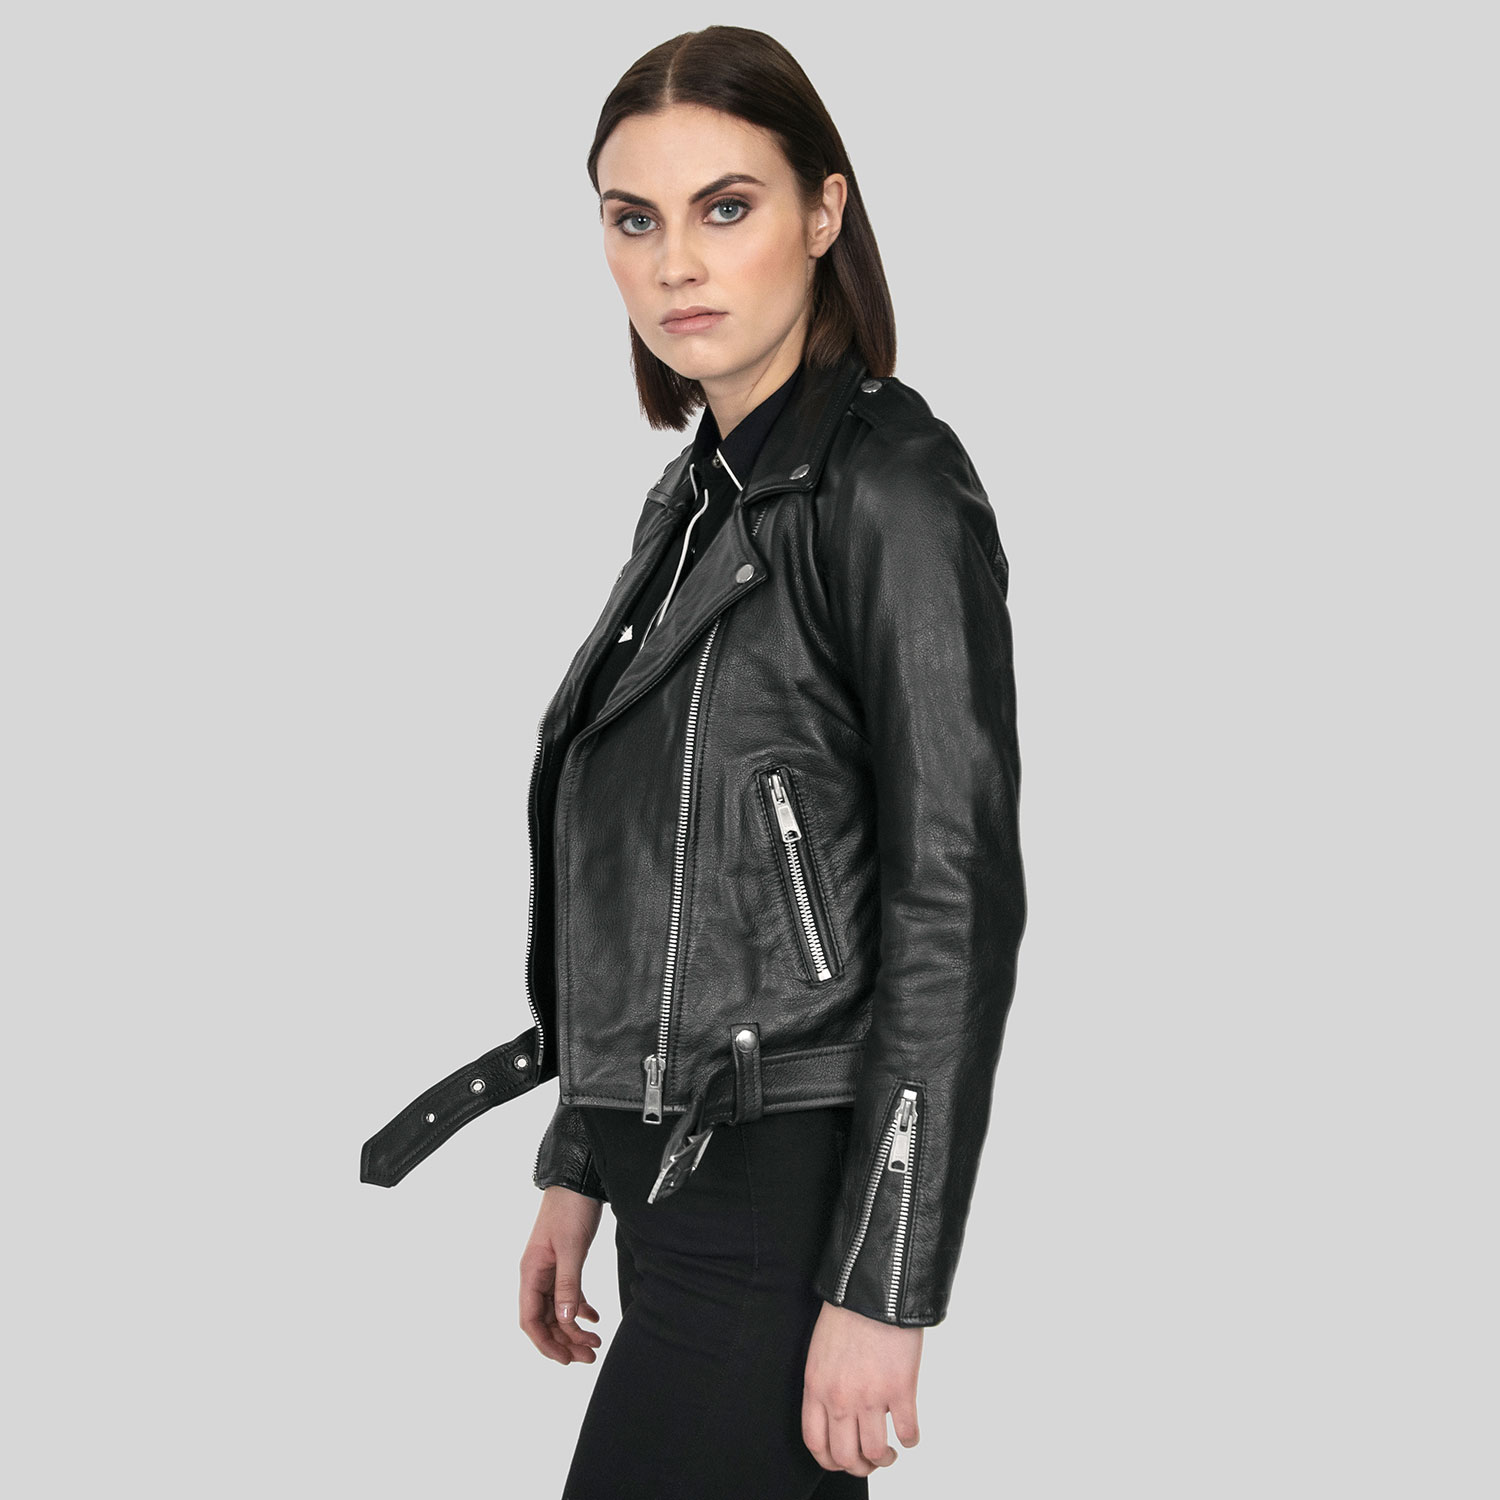 Commando Black Apparel Black Leather Jacket - Nickel Straight | and Hell - Lining To -